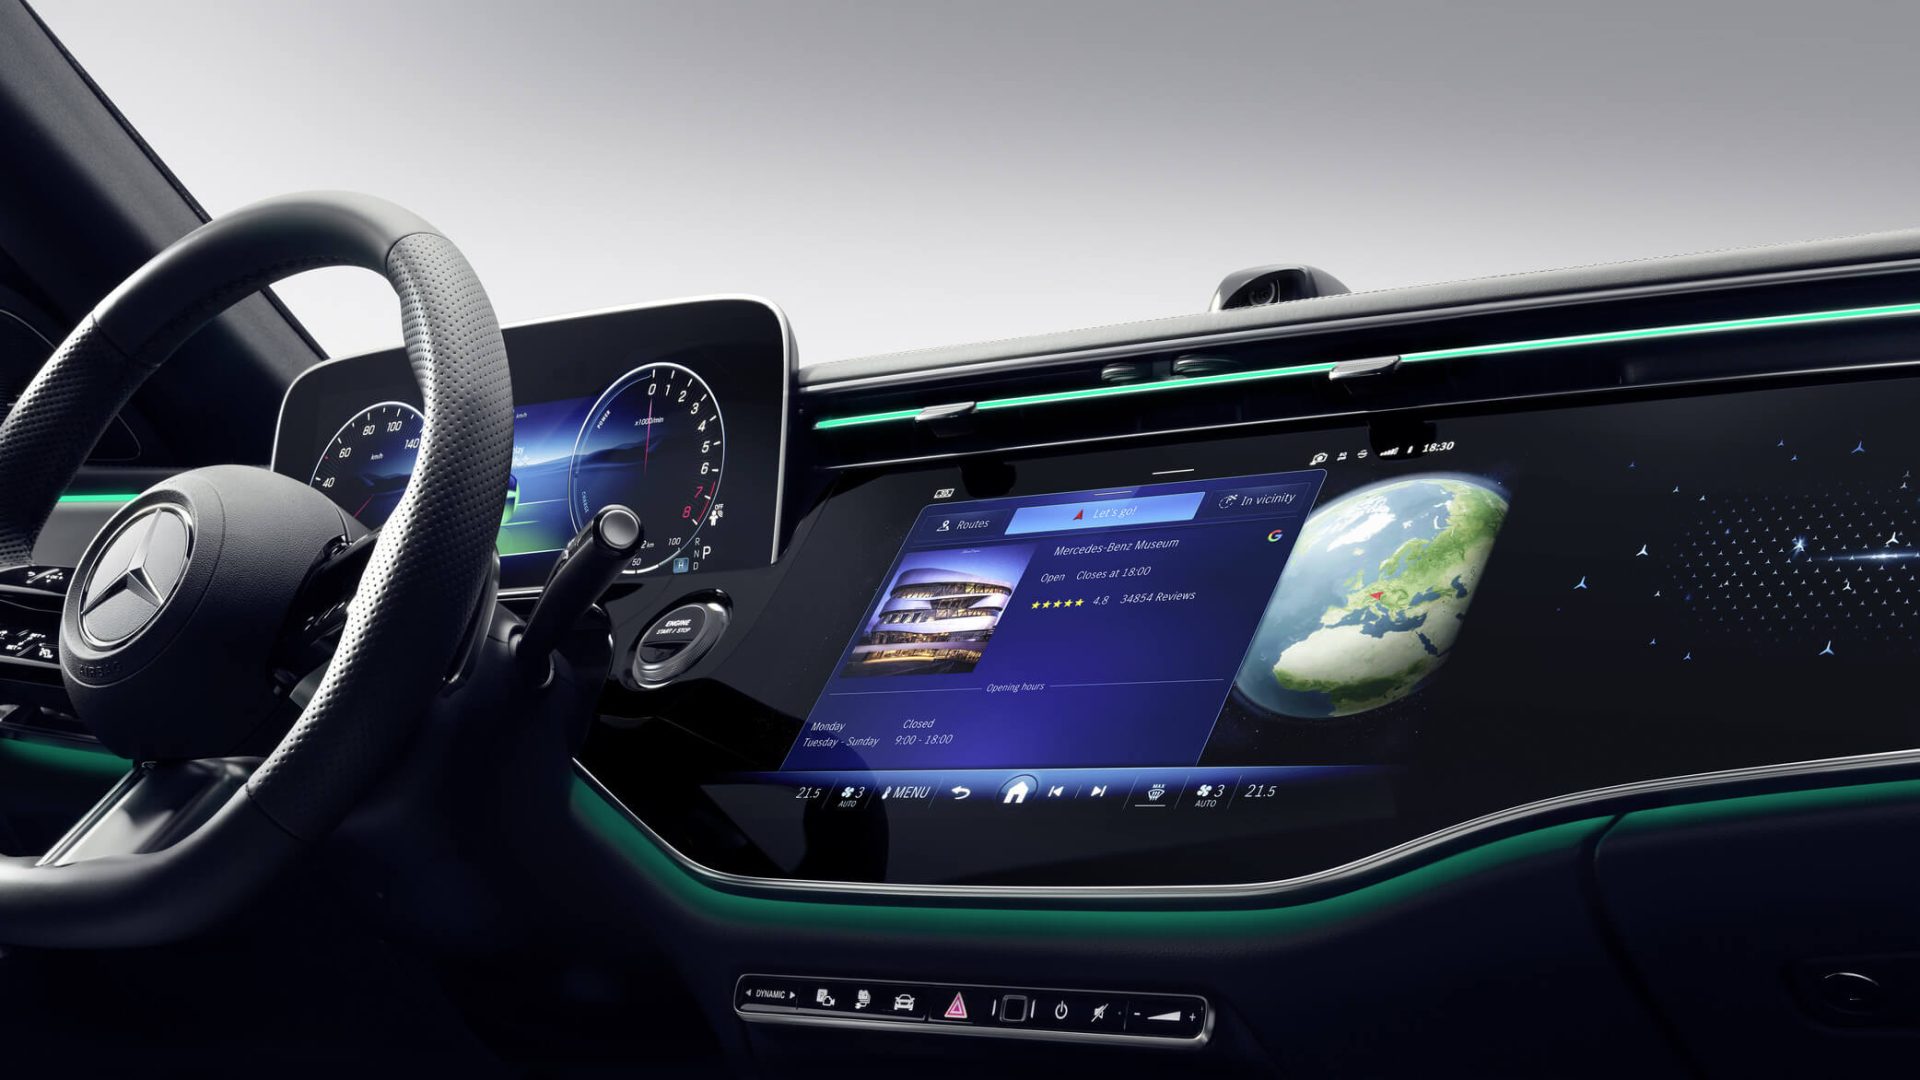 Mercedes-Benz and Google Join Forces to Create Next-Generation Navigation Experience - Map Cockpit